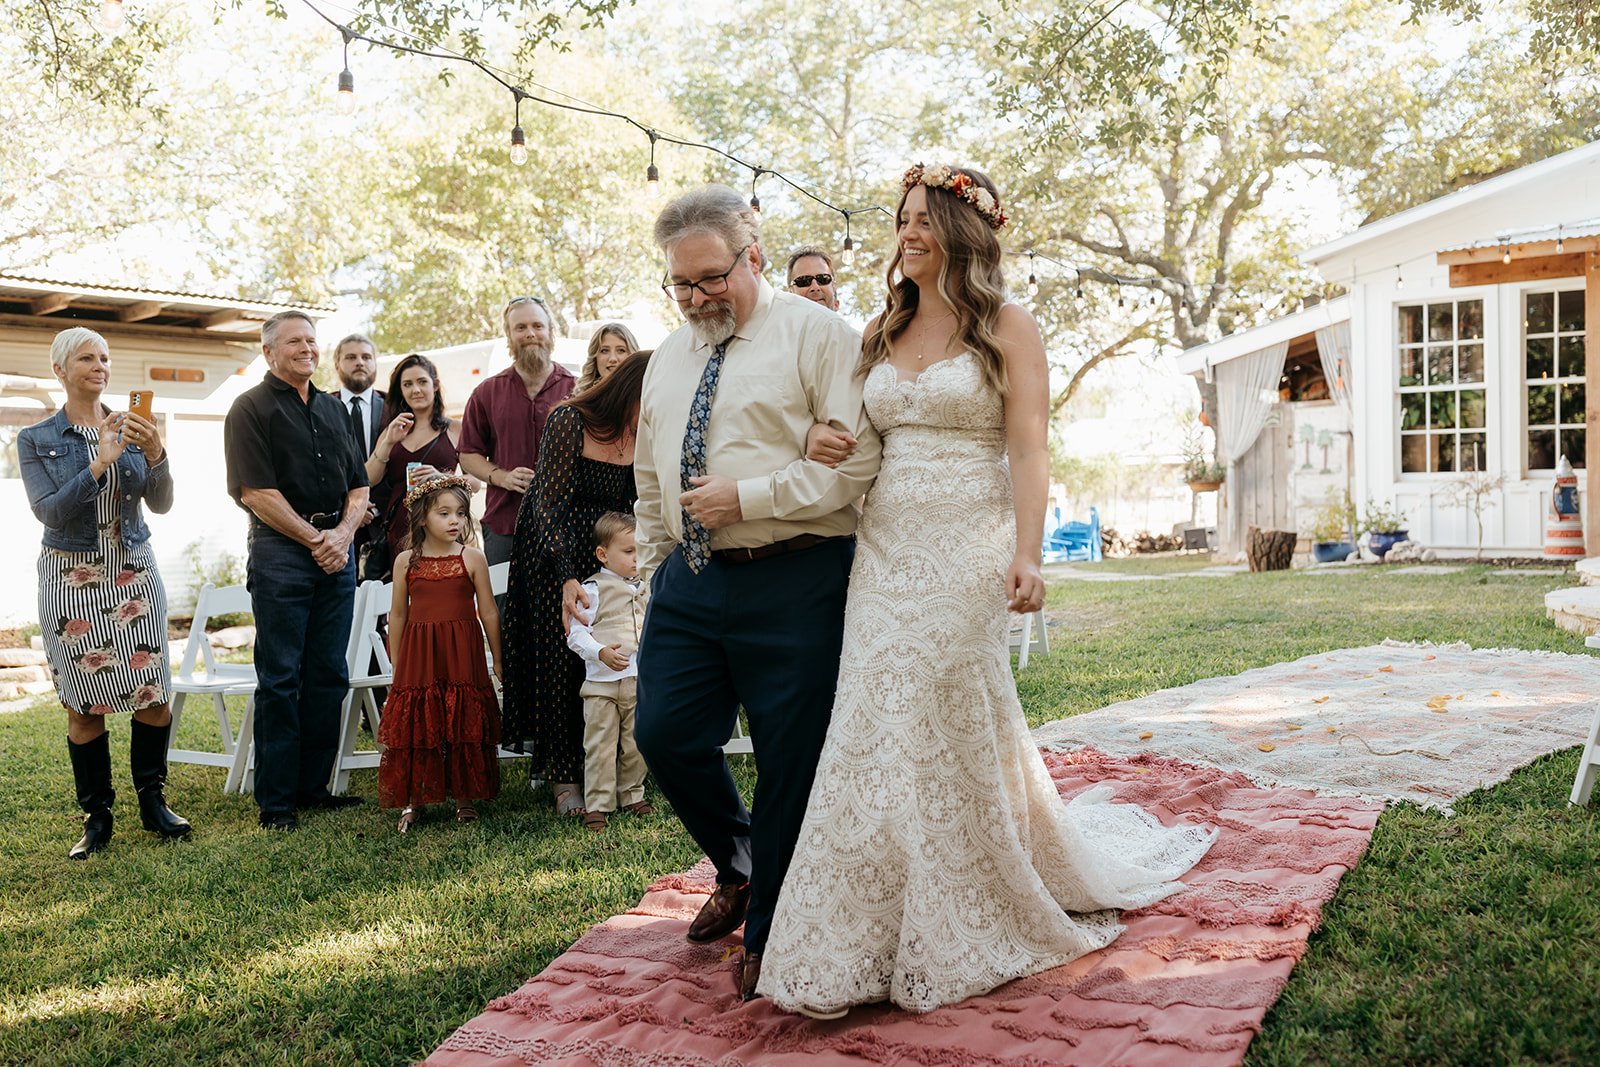 Leah walked down the aisle with her dad